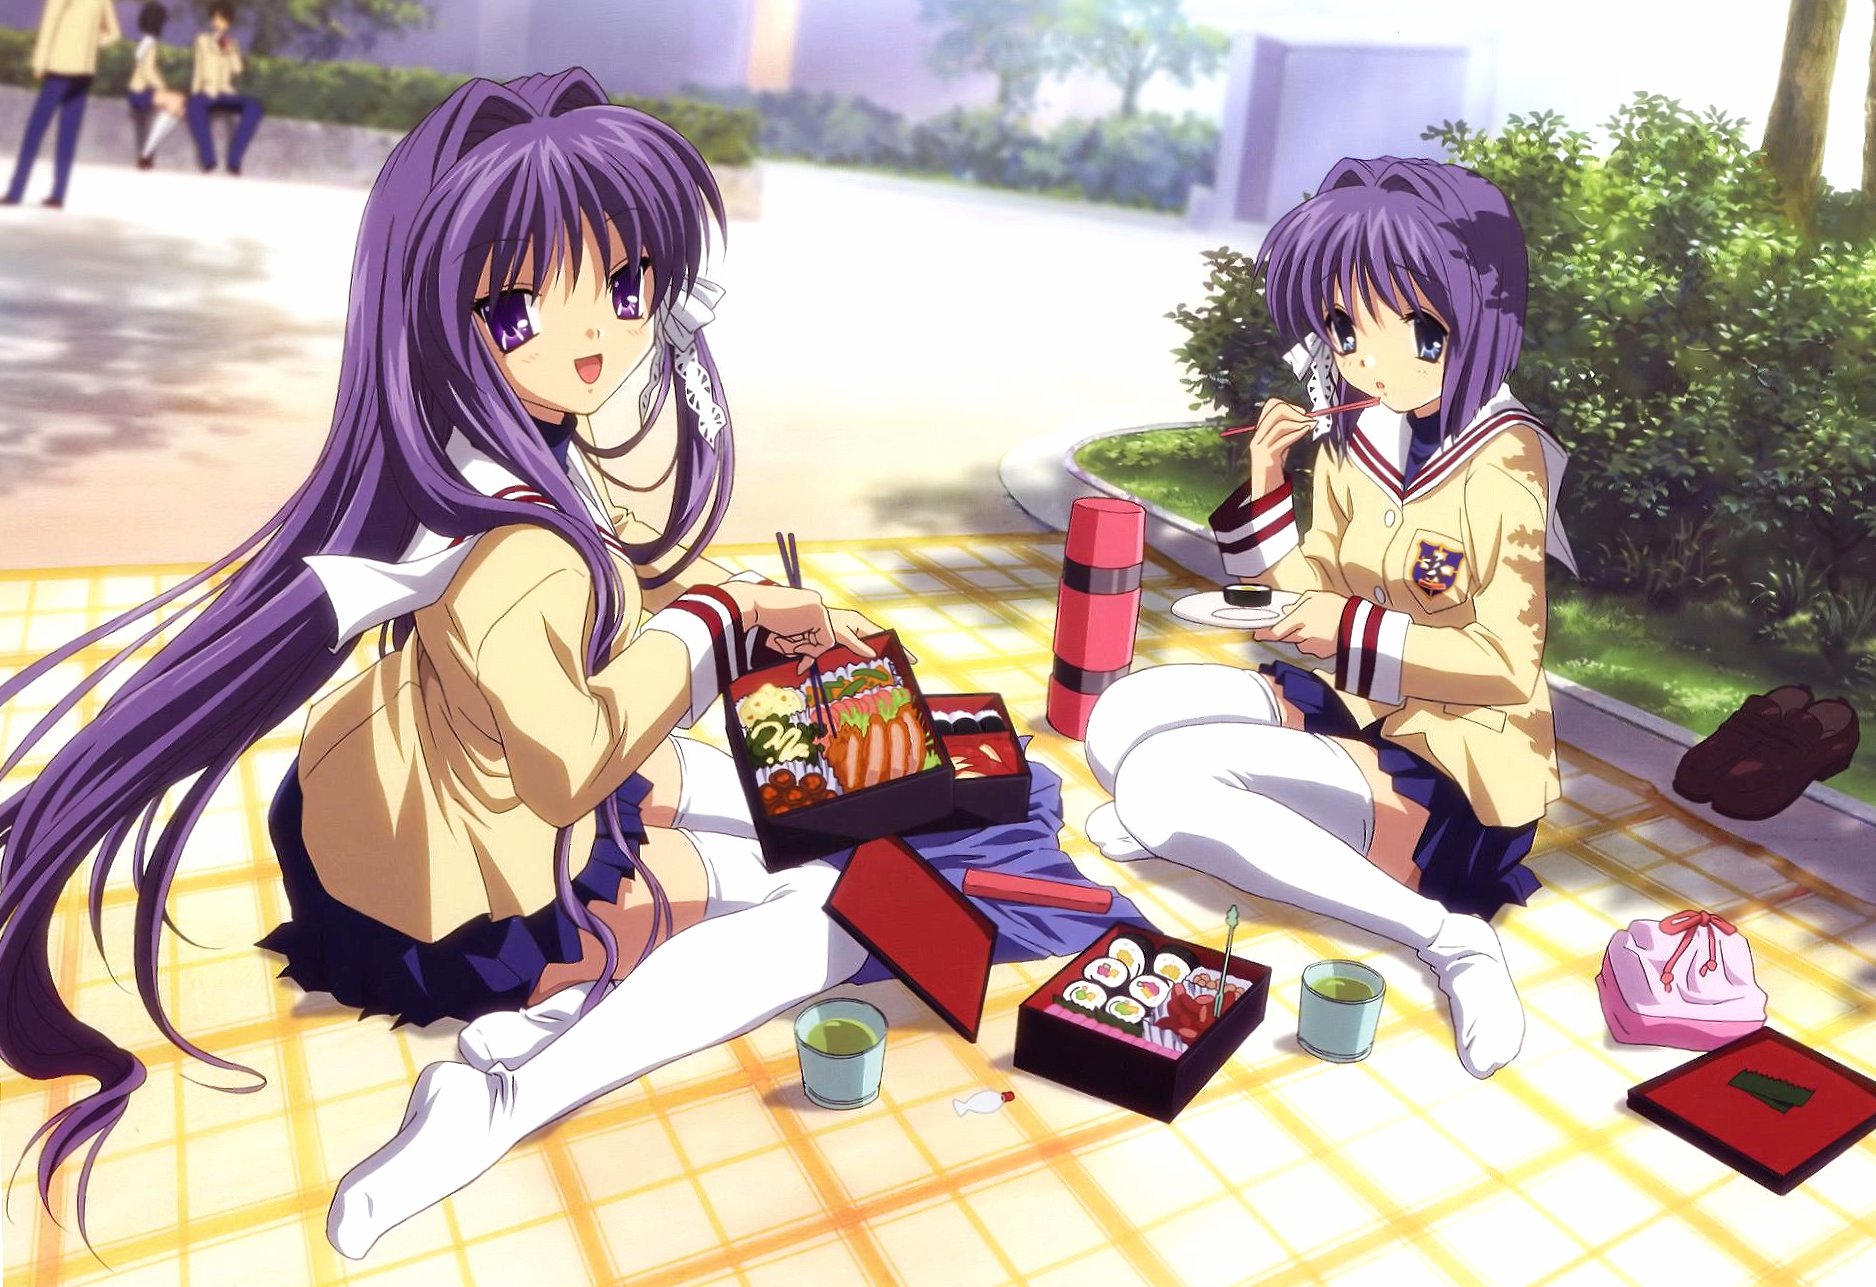 Kyou and ryou clannad anime wallpapers HD quality